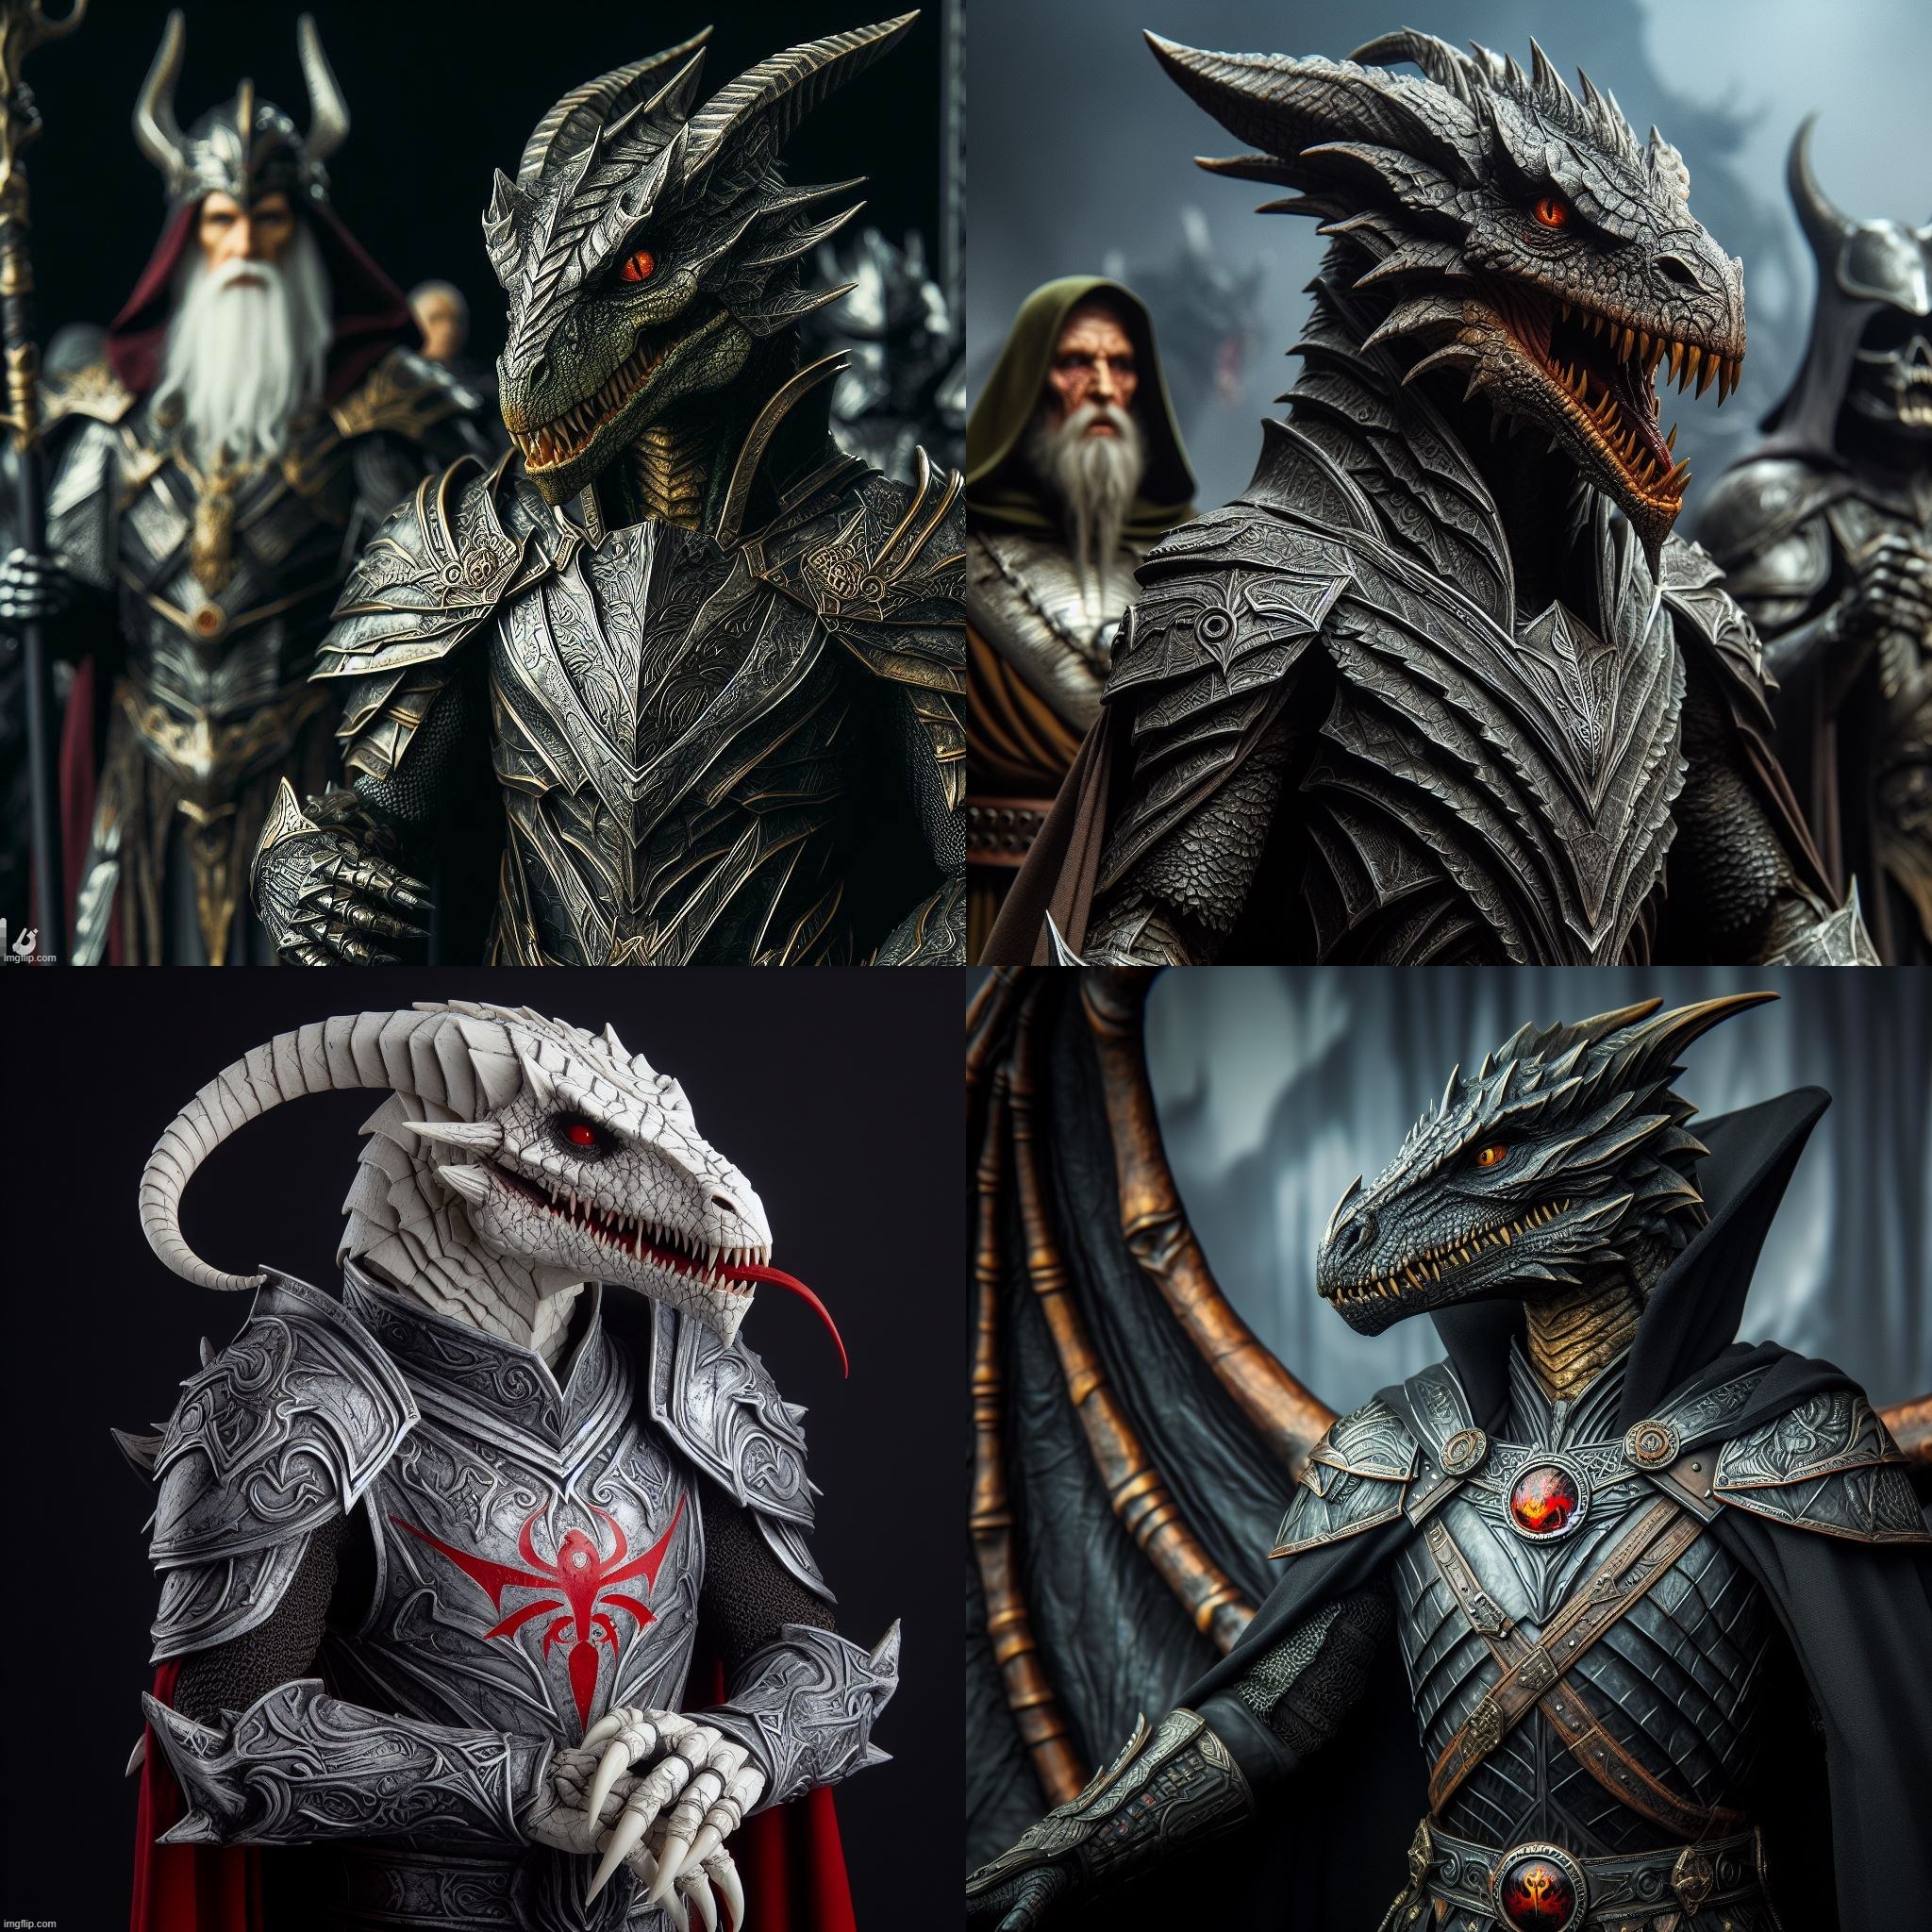 AI Bing Draco Reptilian Overlords in armor based off of Count Dracula, Lord Sauron, Sith Lords, and Death Knights. | image tagged in reptilians,death knights,dracula,sauron,sith lord,ai generated | made w/ Imgflip meme maker